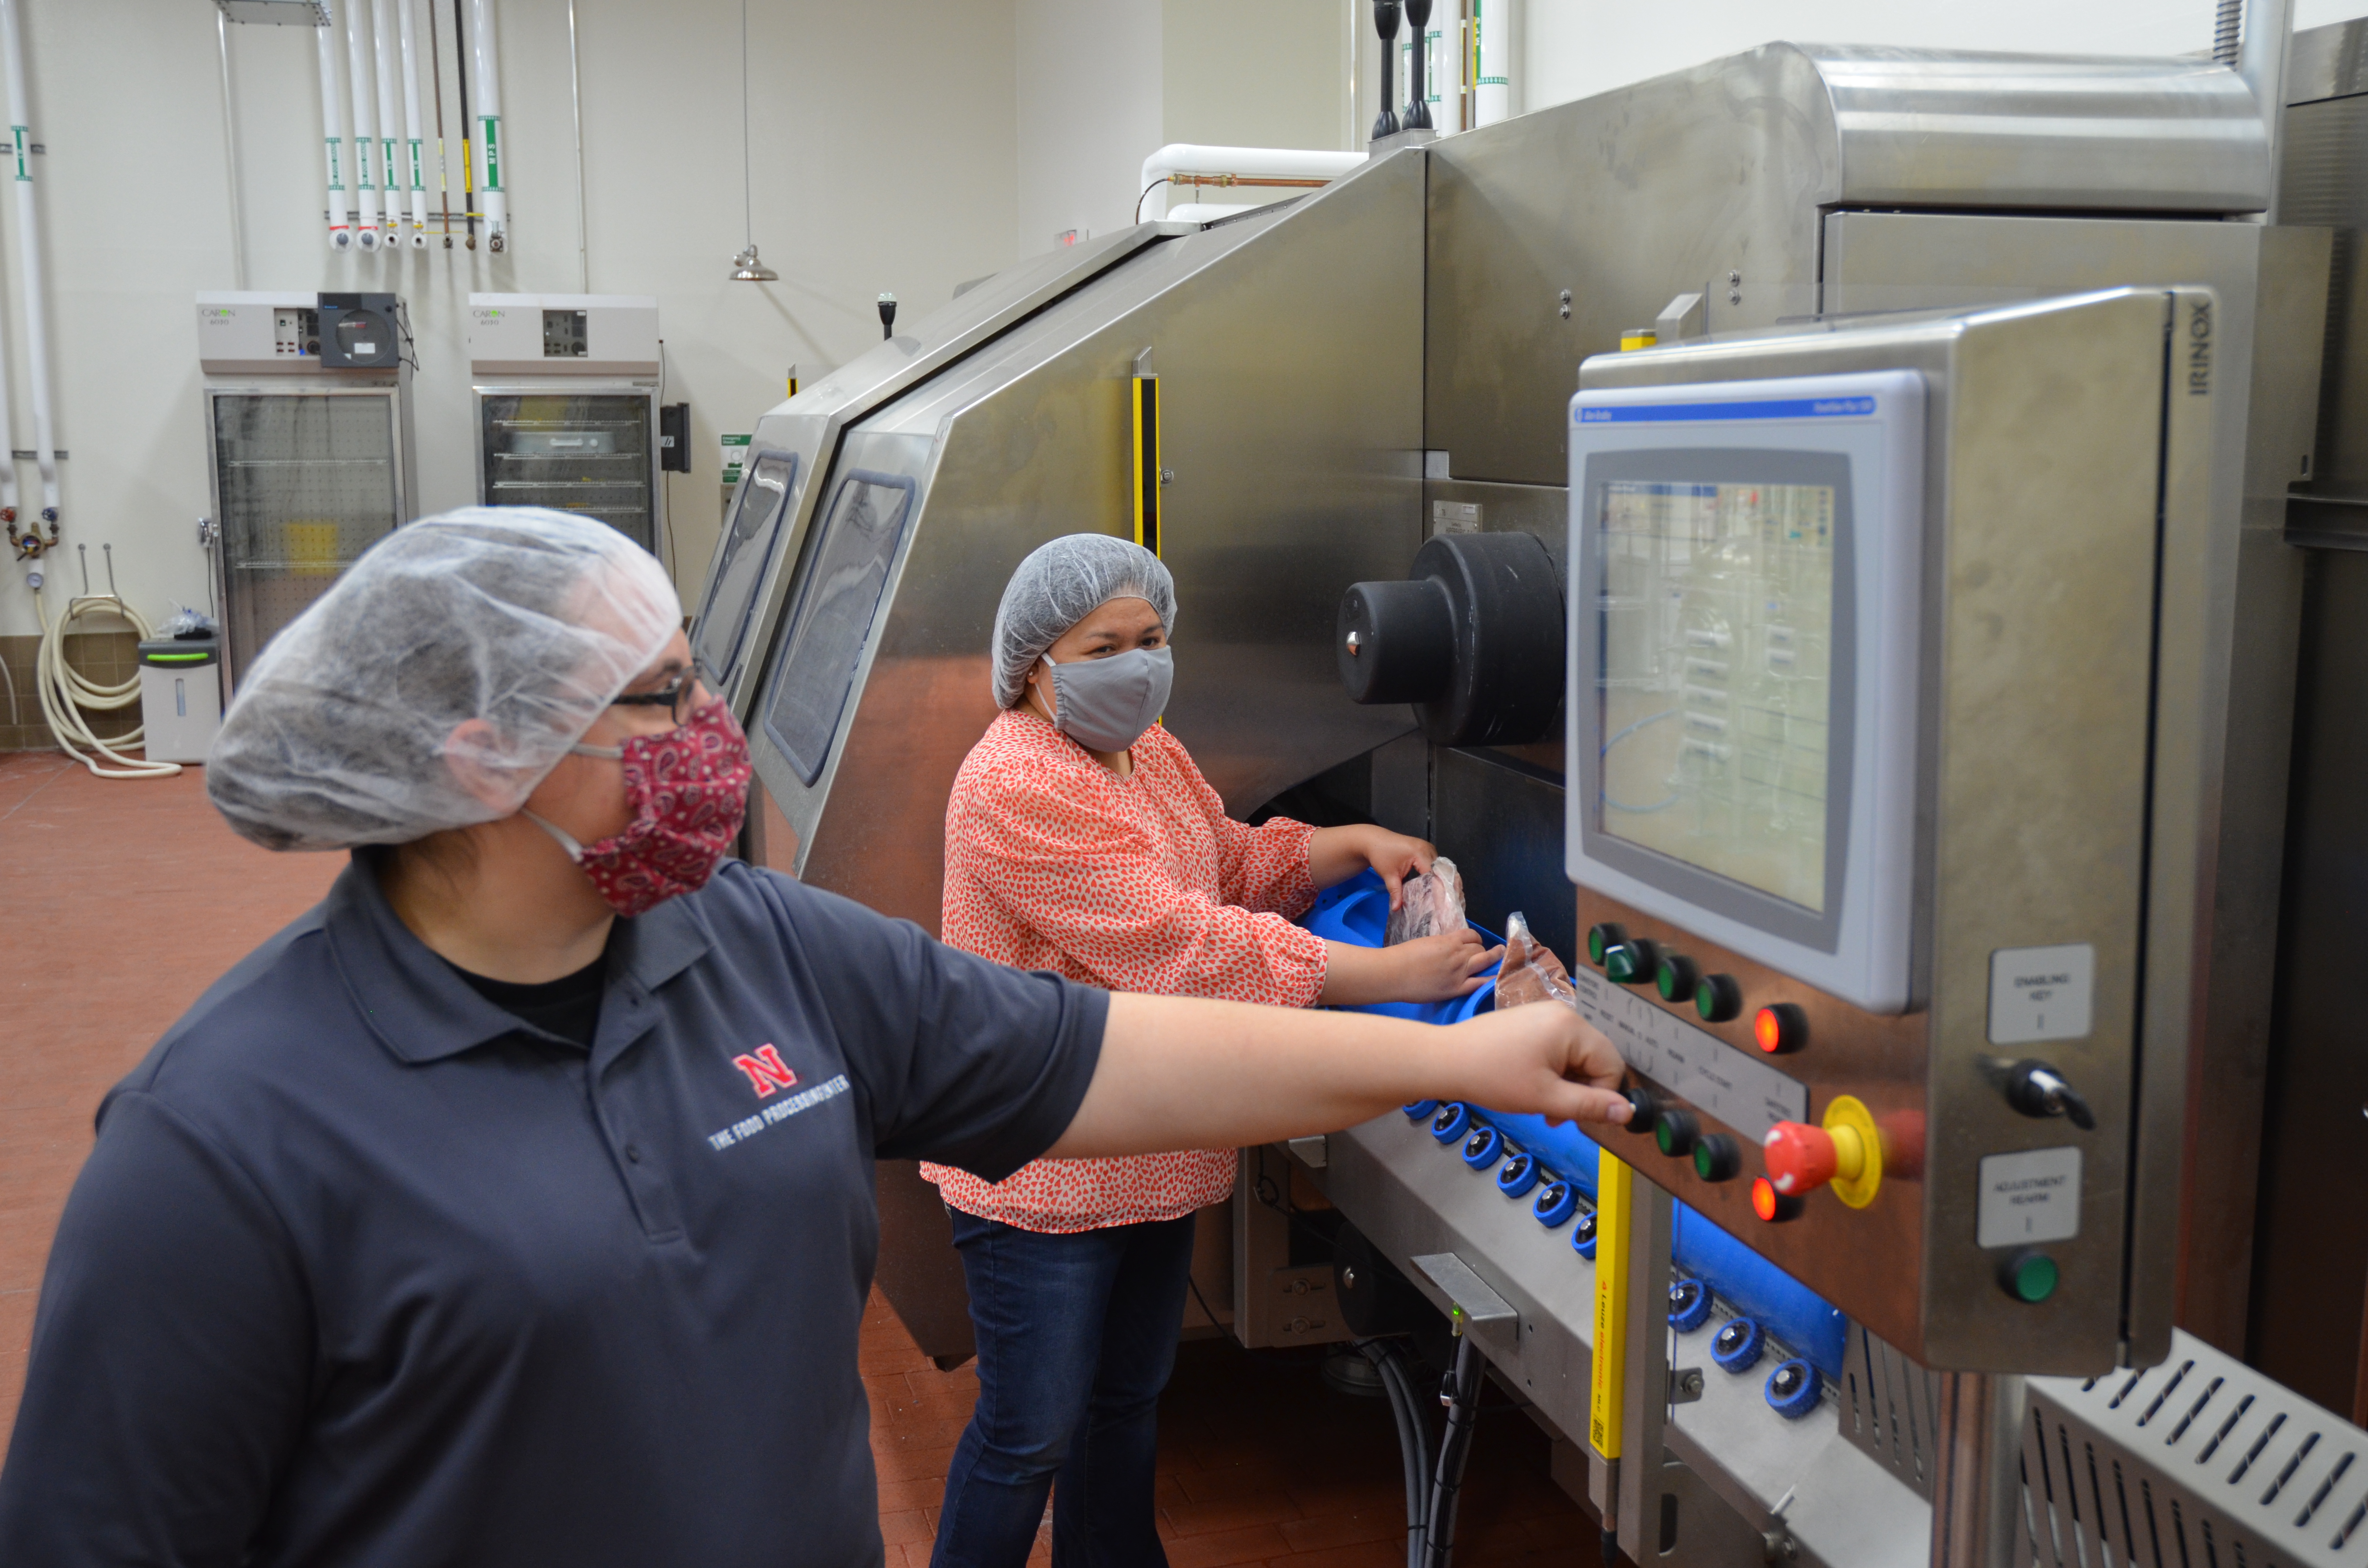 Two people working with high pressure processing equipment